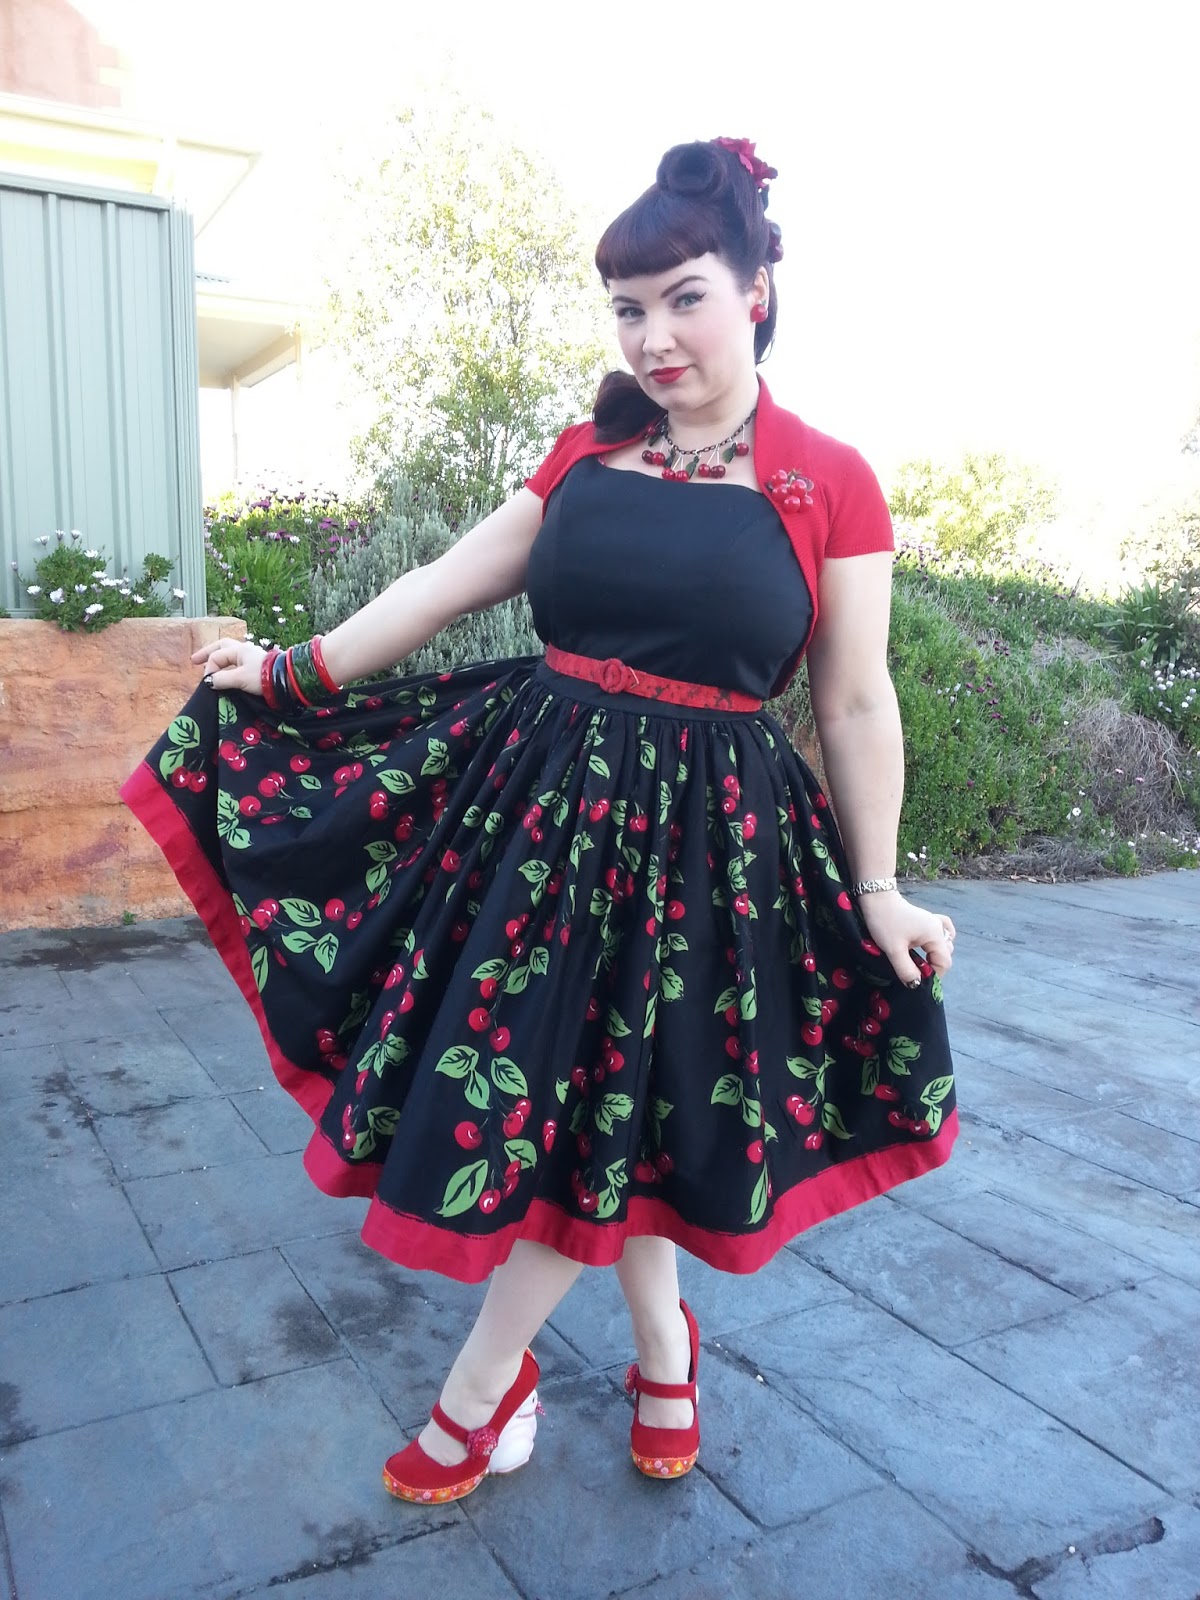 Vintage Musings Of A Modern Pinup: Cherries GALORE! A Review of The ...